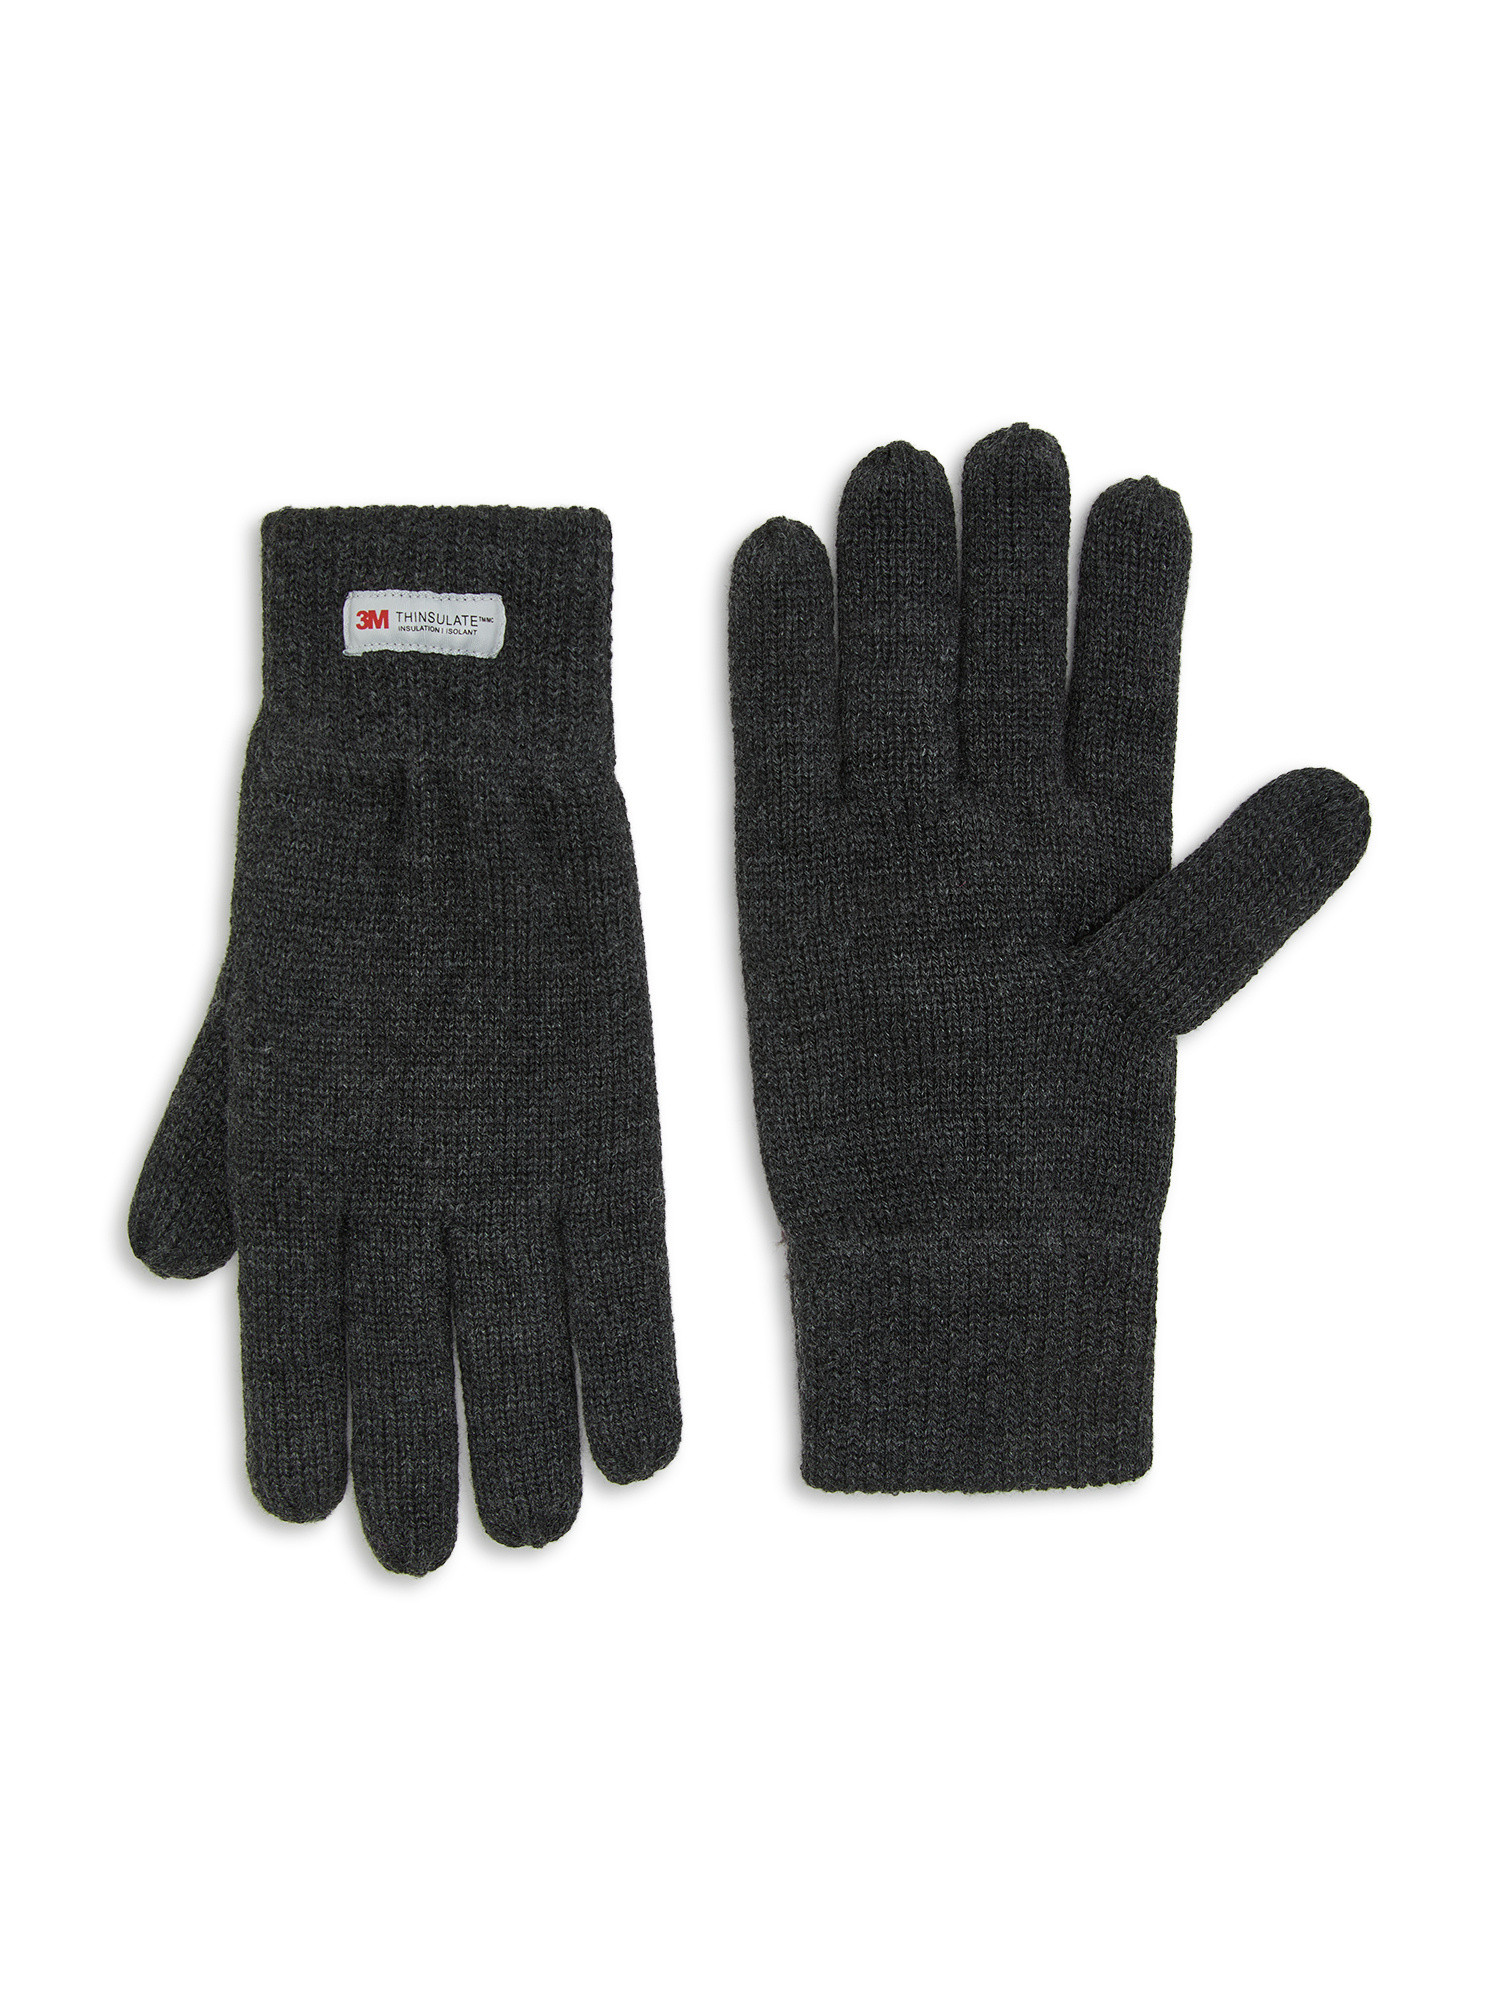 Luca D'Altieri - Knitted gloves, Anthracite, large image number 0